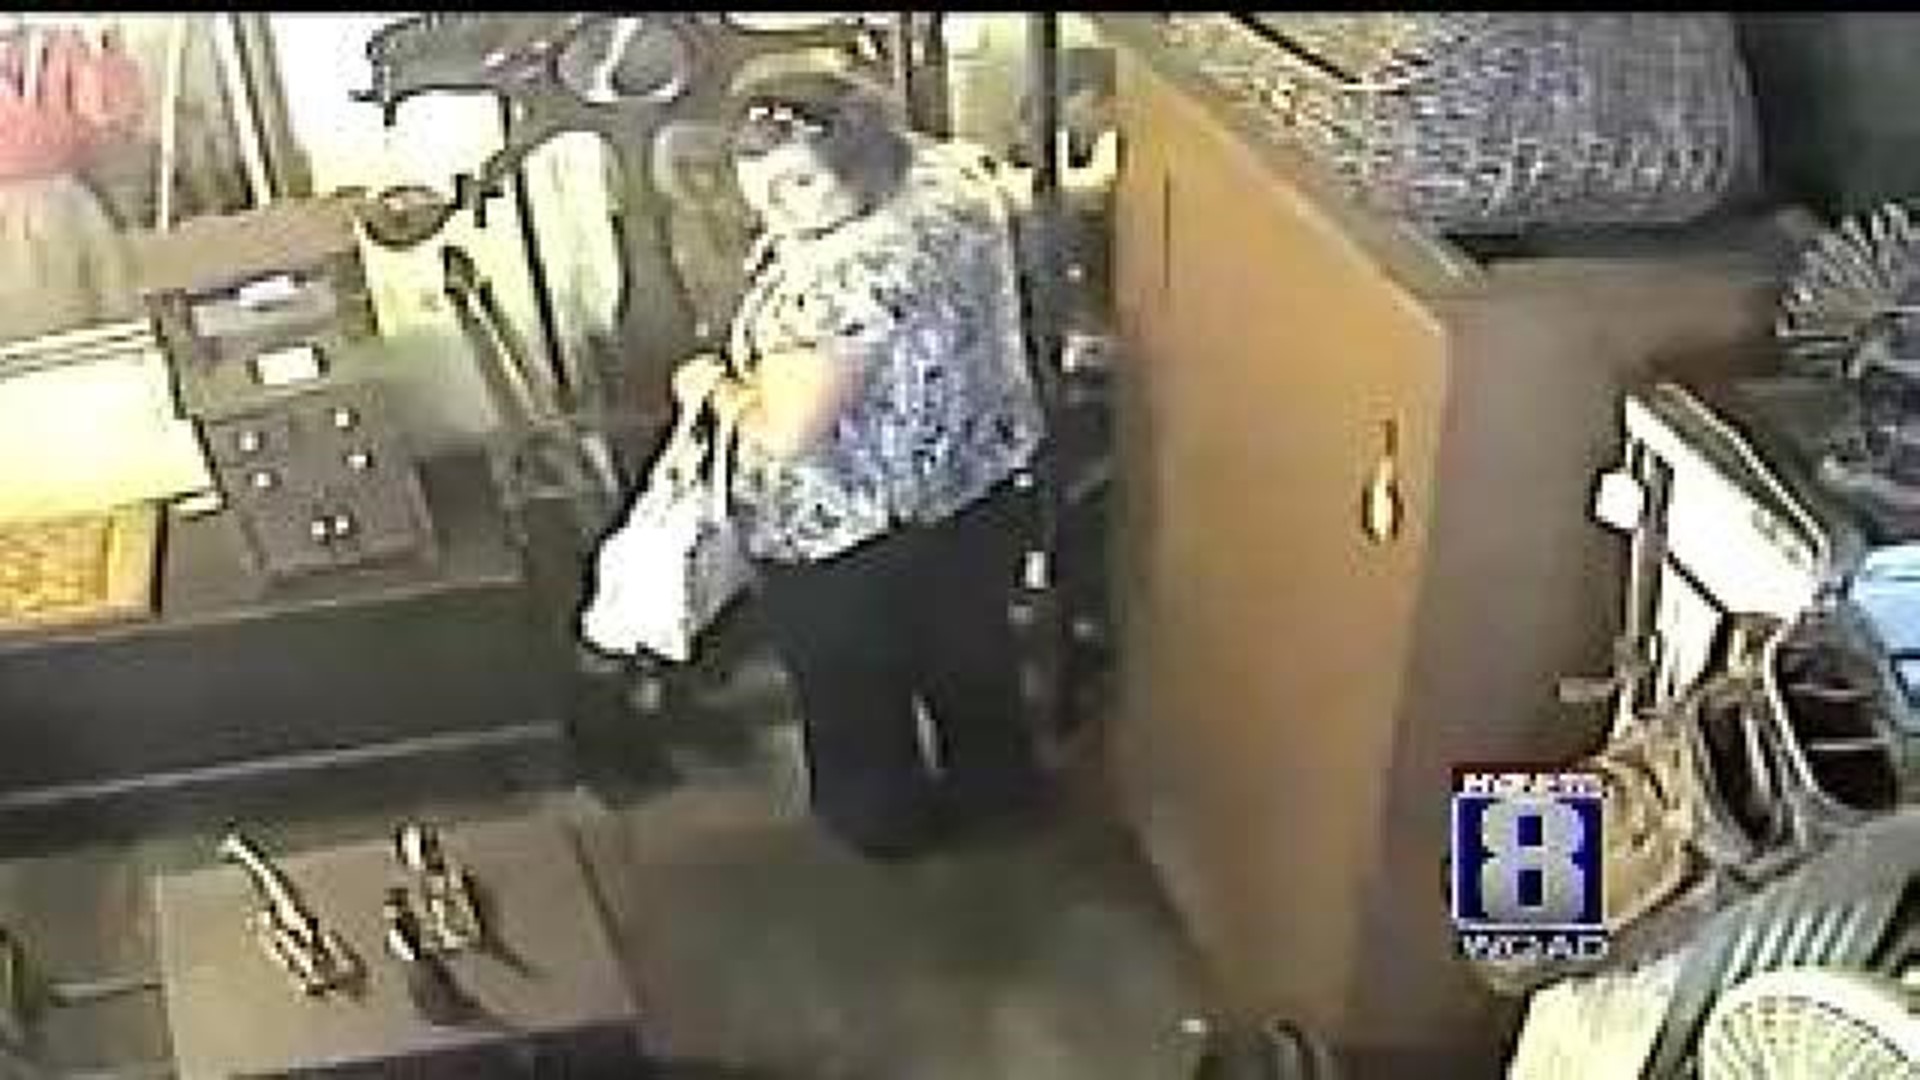 The store owner responds to shoplifting caught on tape